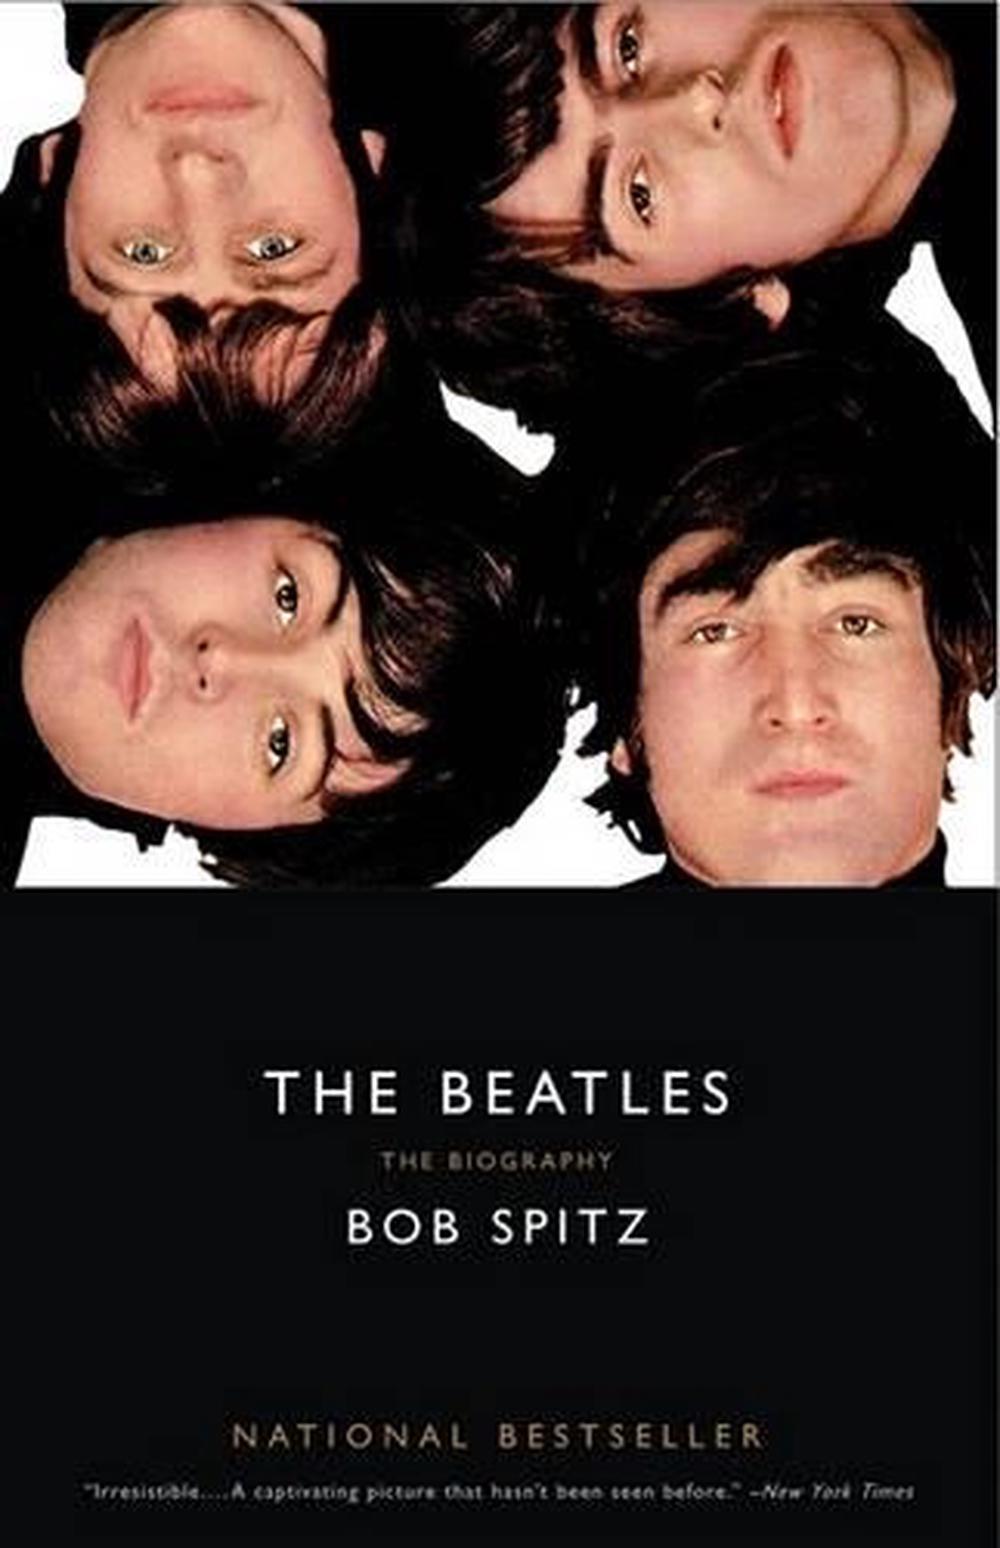 short biography of the beatles